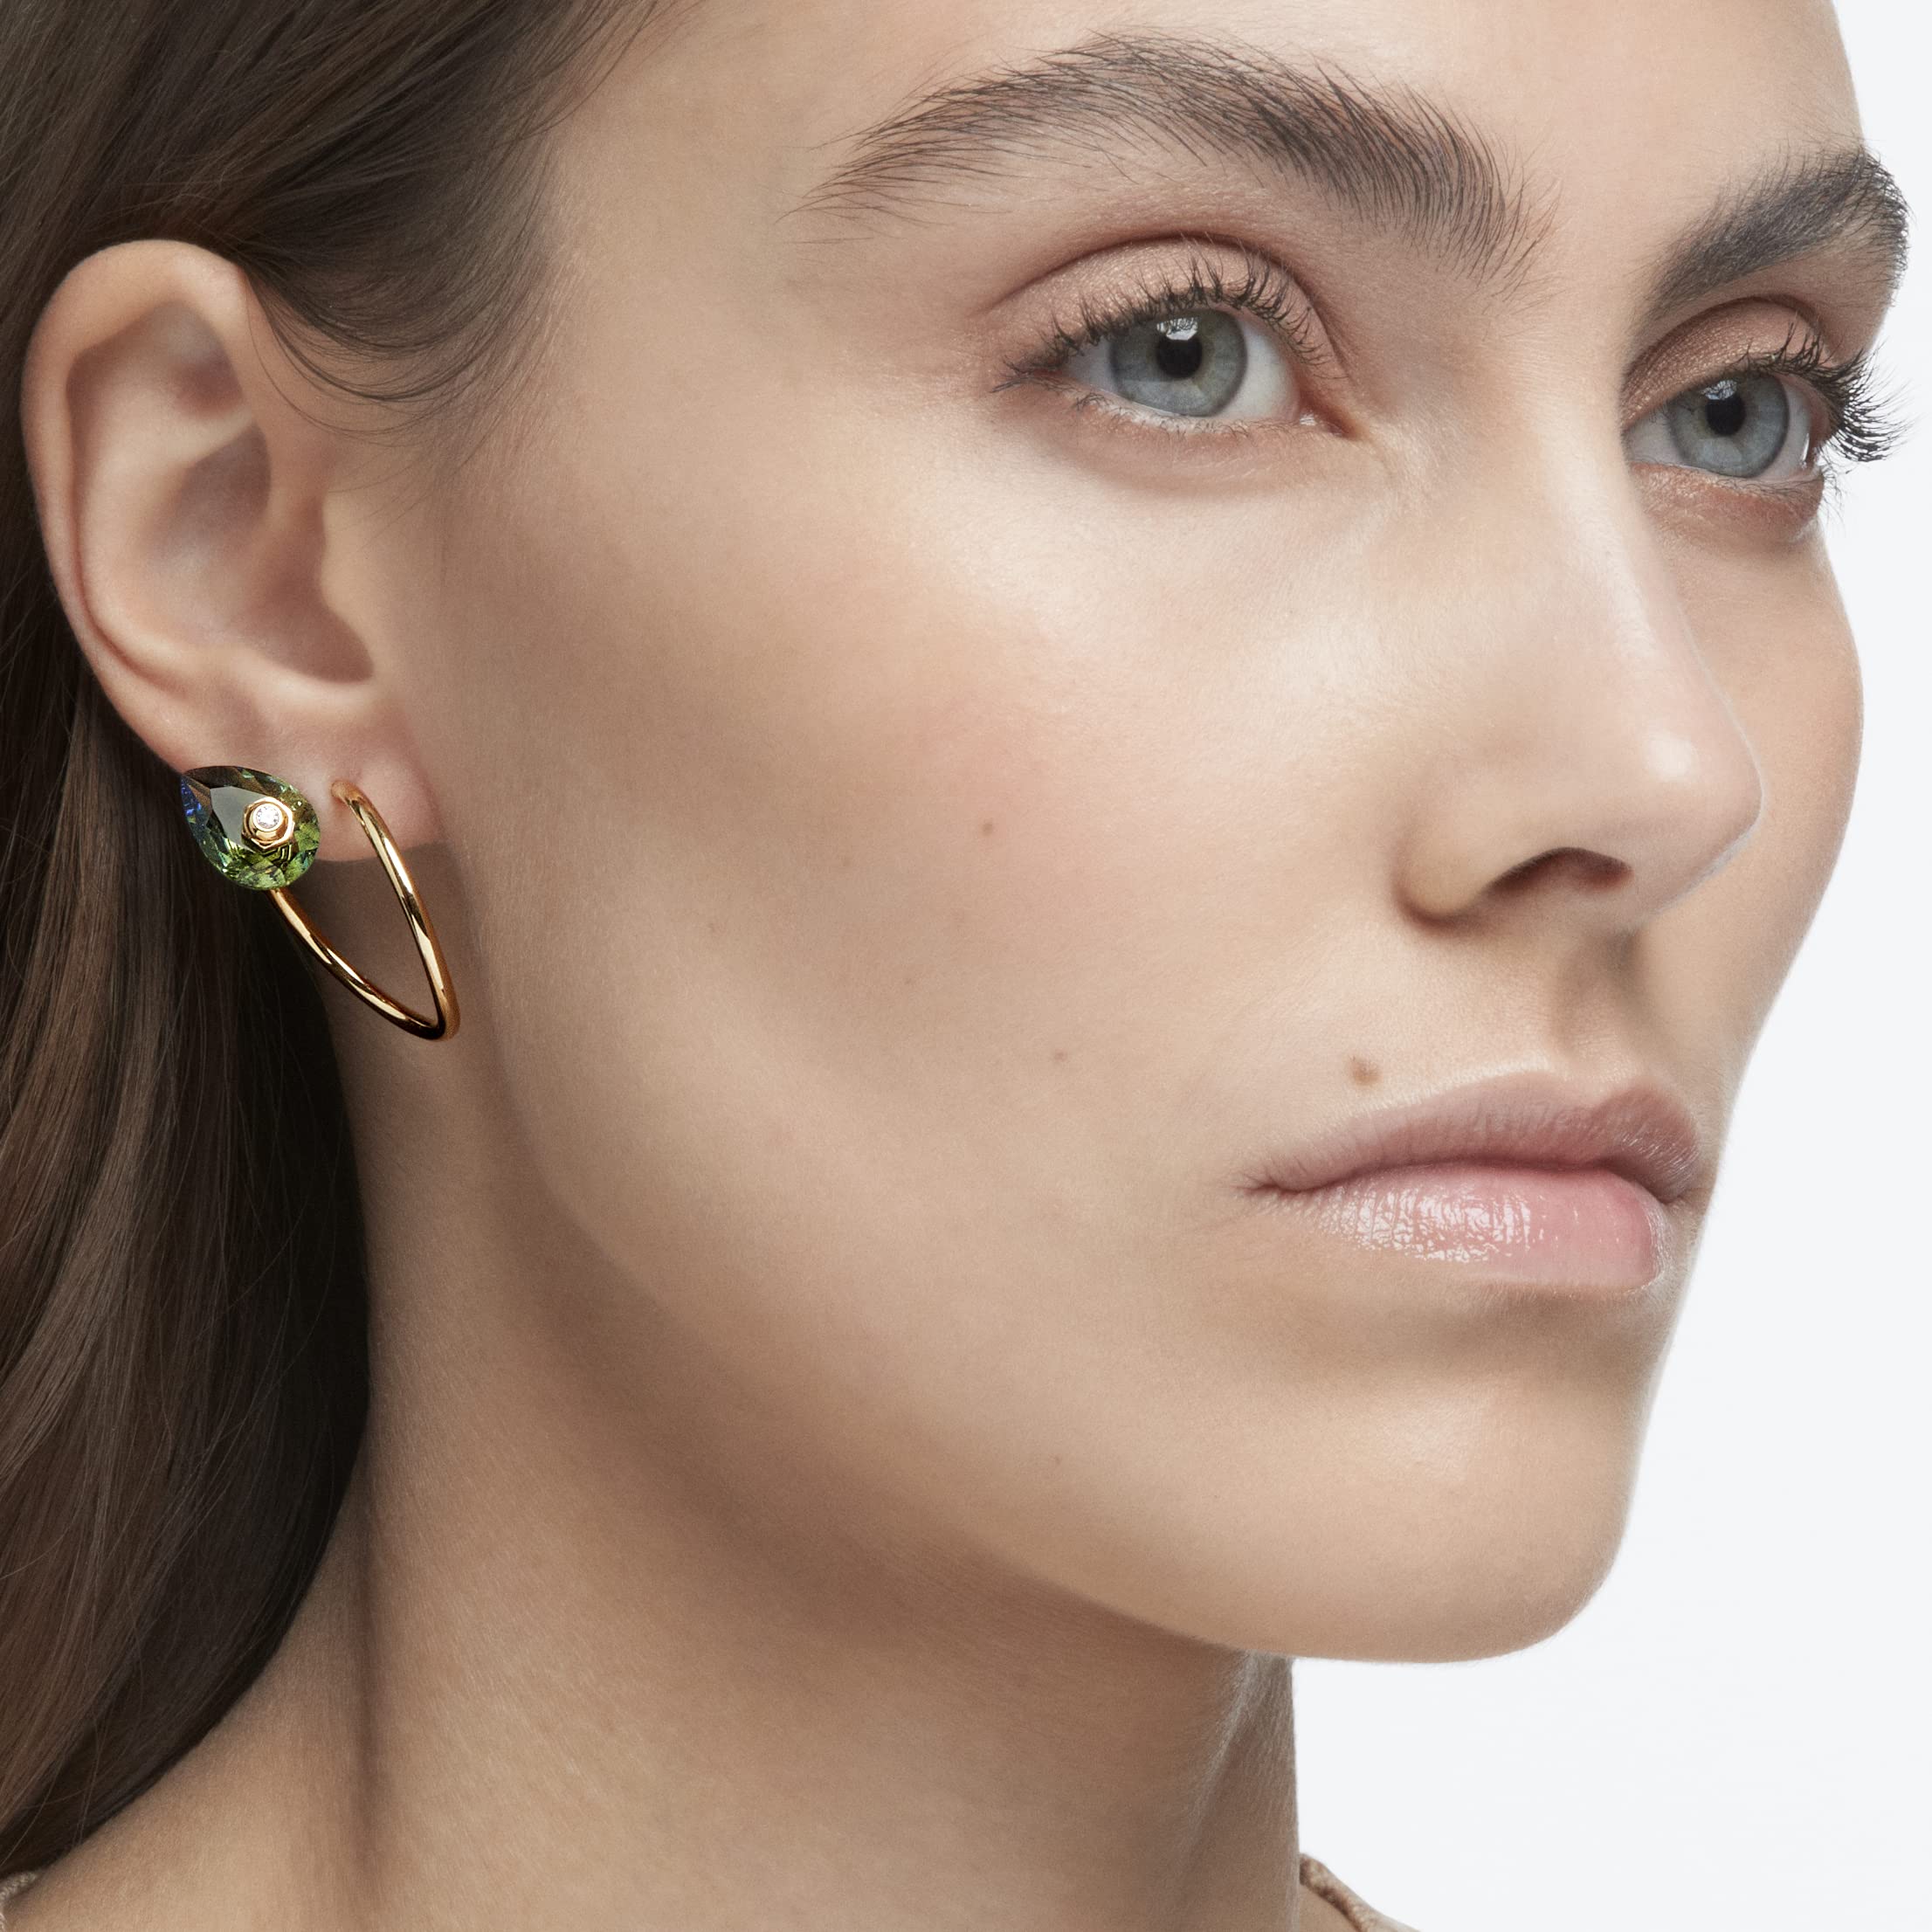 Swarovski Numina Earring Jewelry Collection, Gold Tone Finish, Green Crystals, Clear Crystals